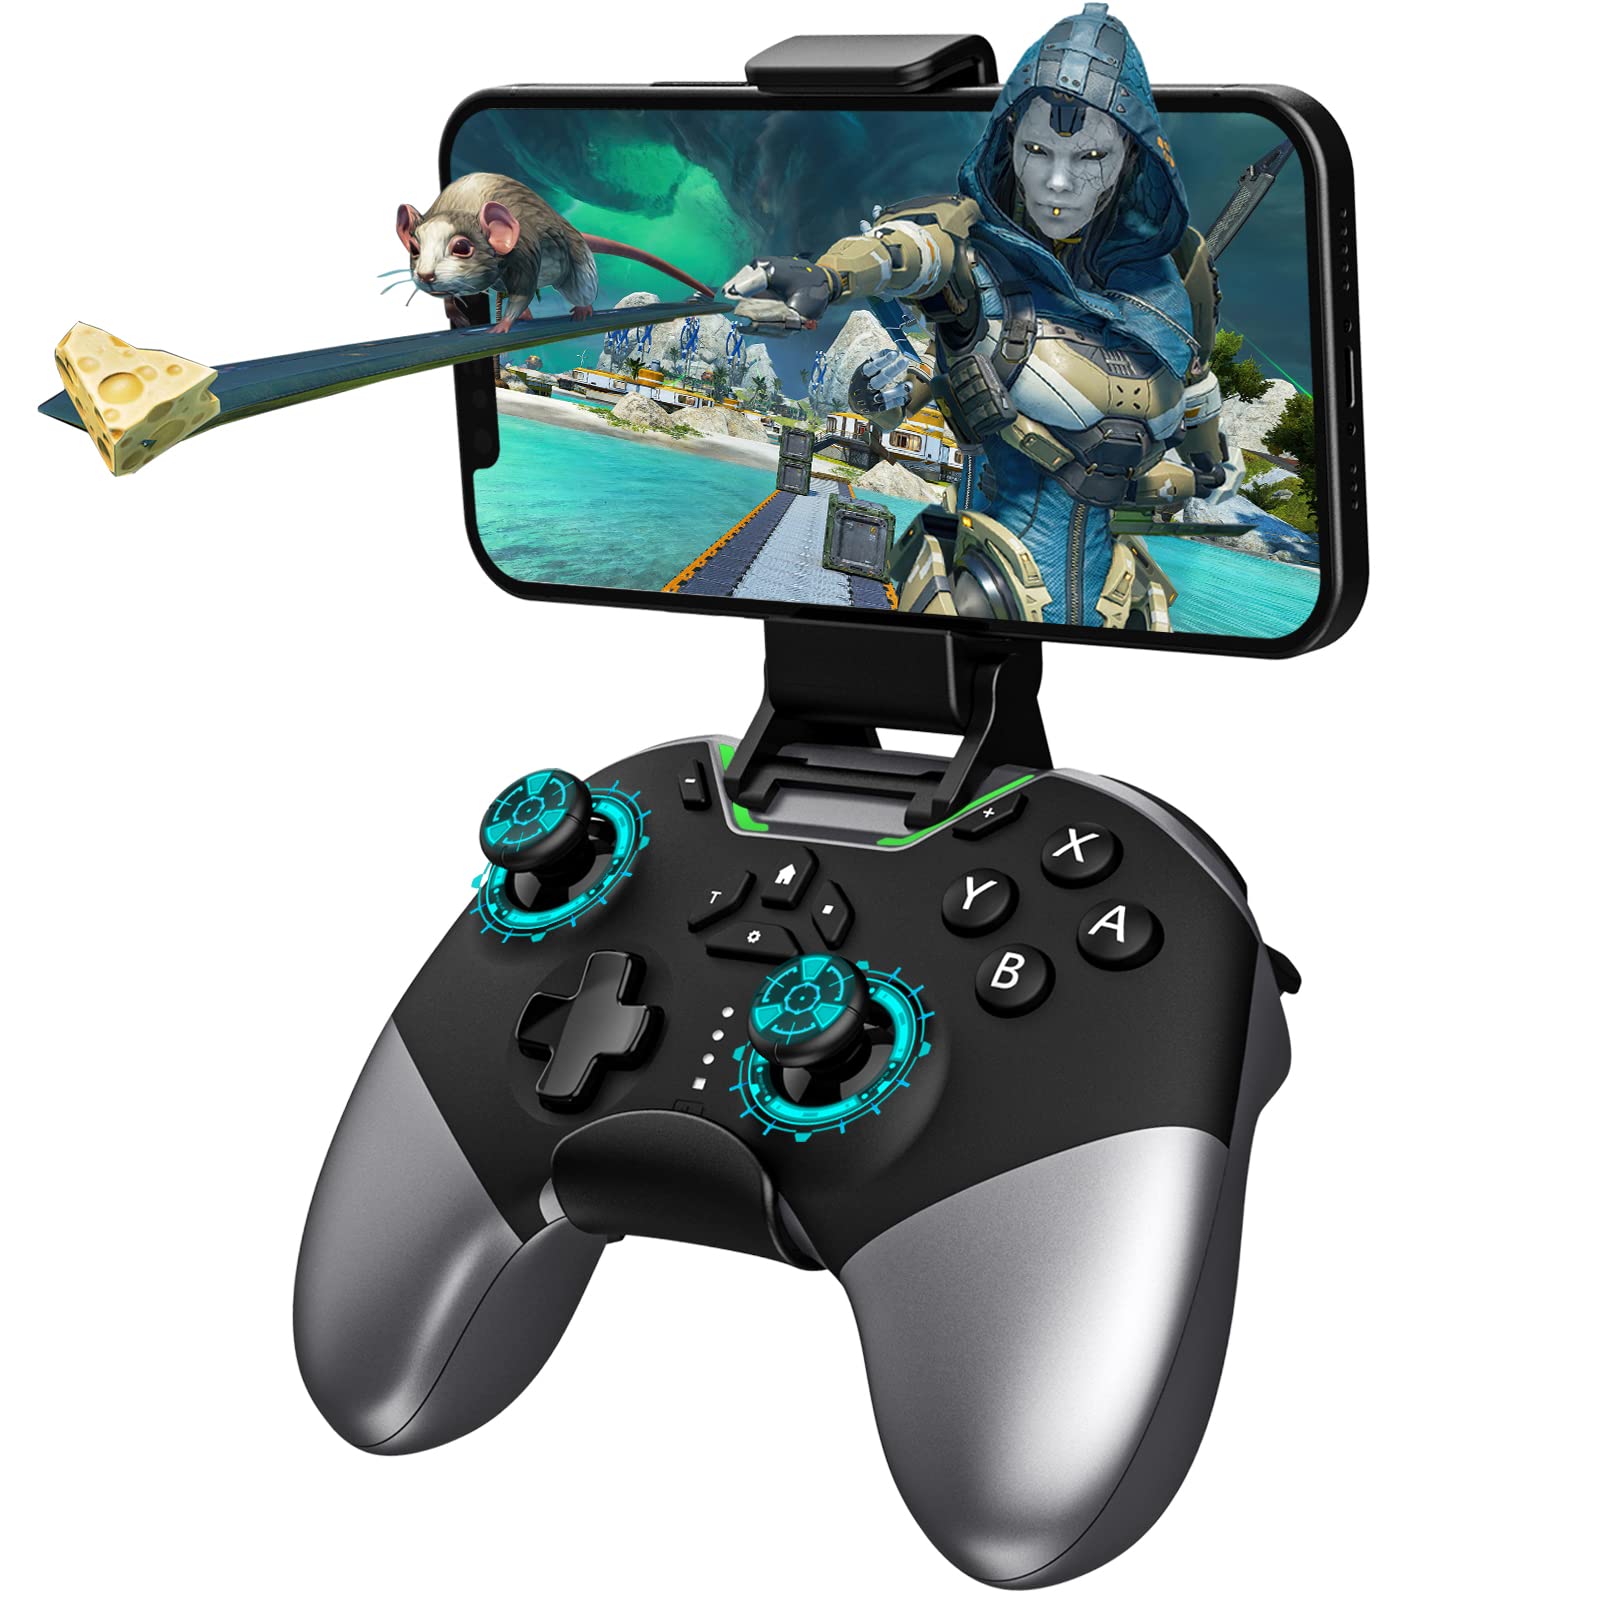 20 Best iOS Games with Controller Support (2023)